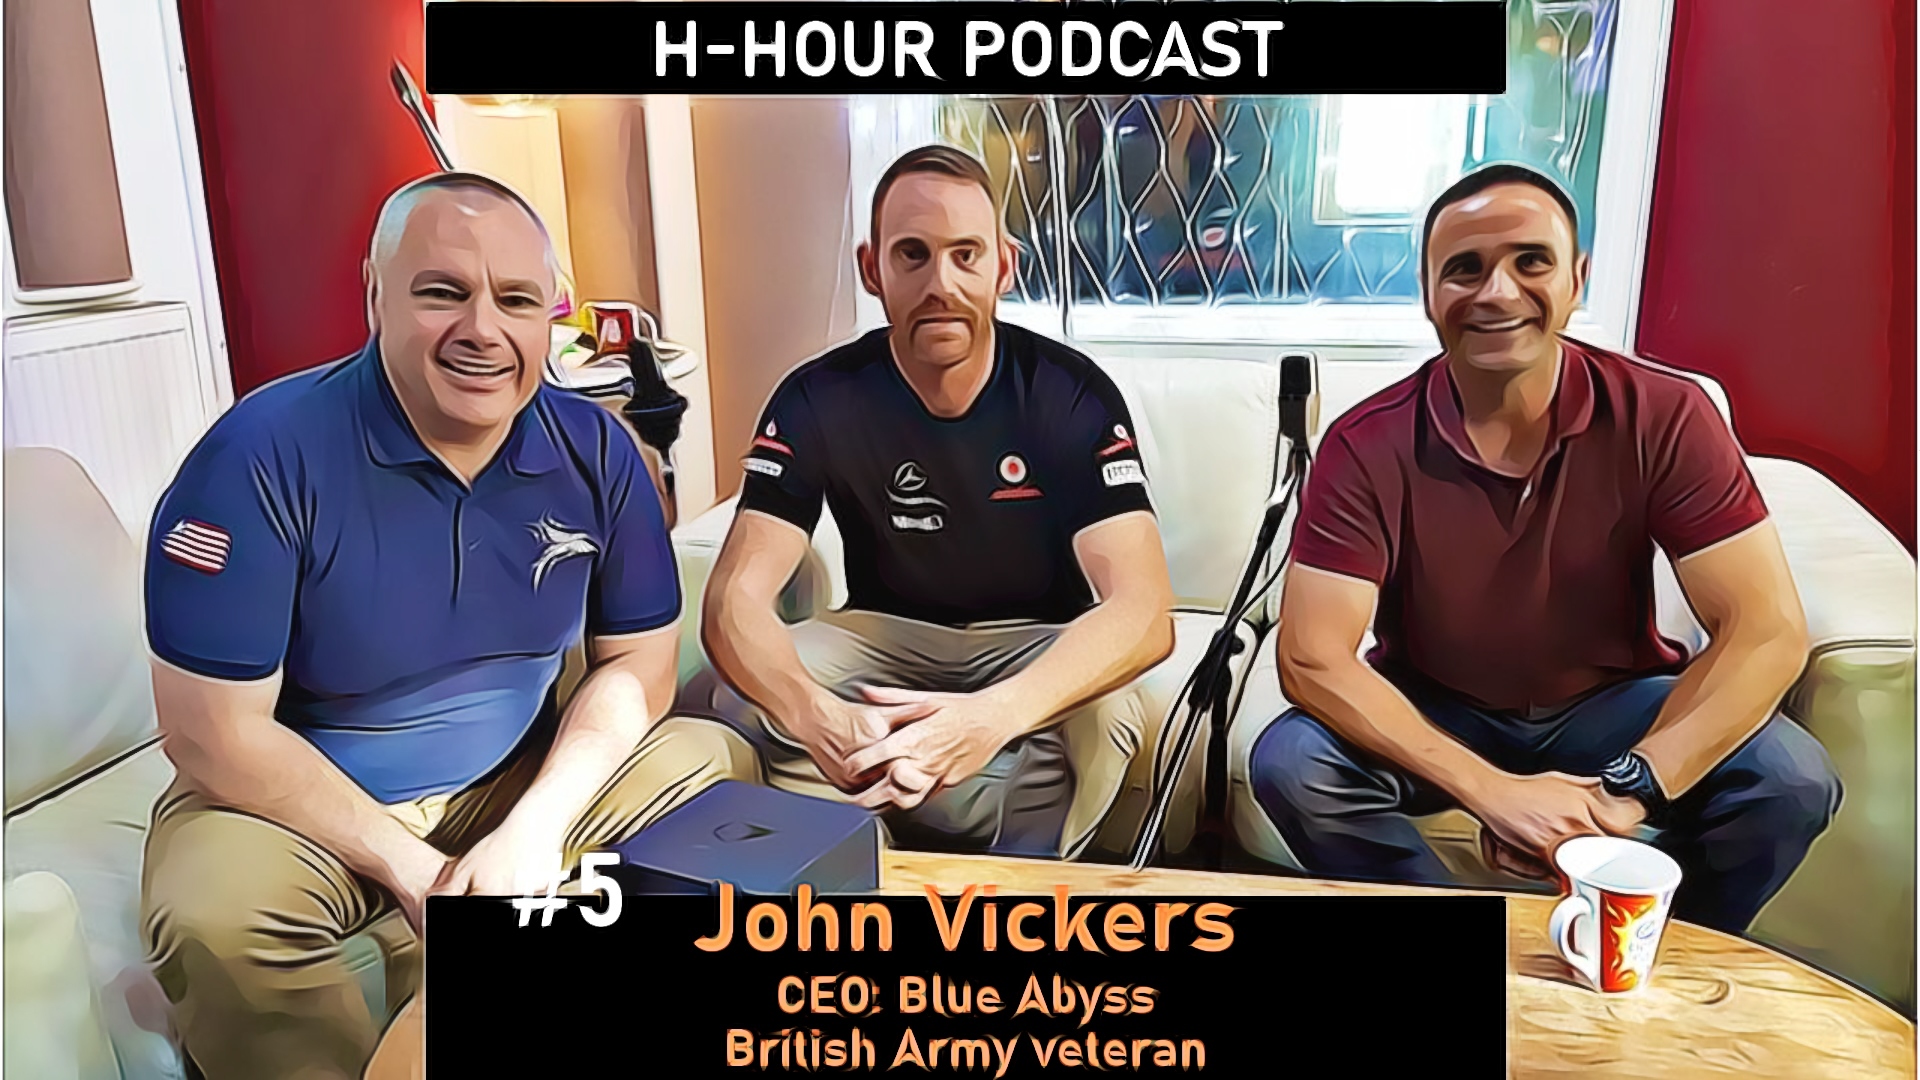 h-hour Podcast nft #5 john vickers cover image